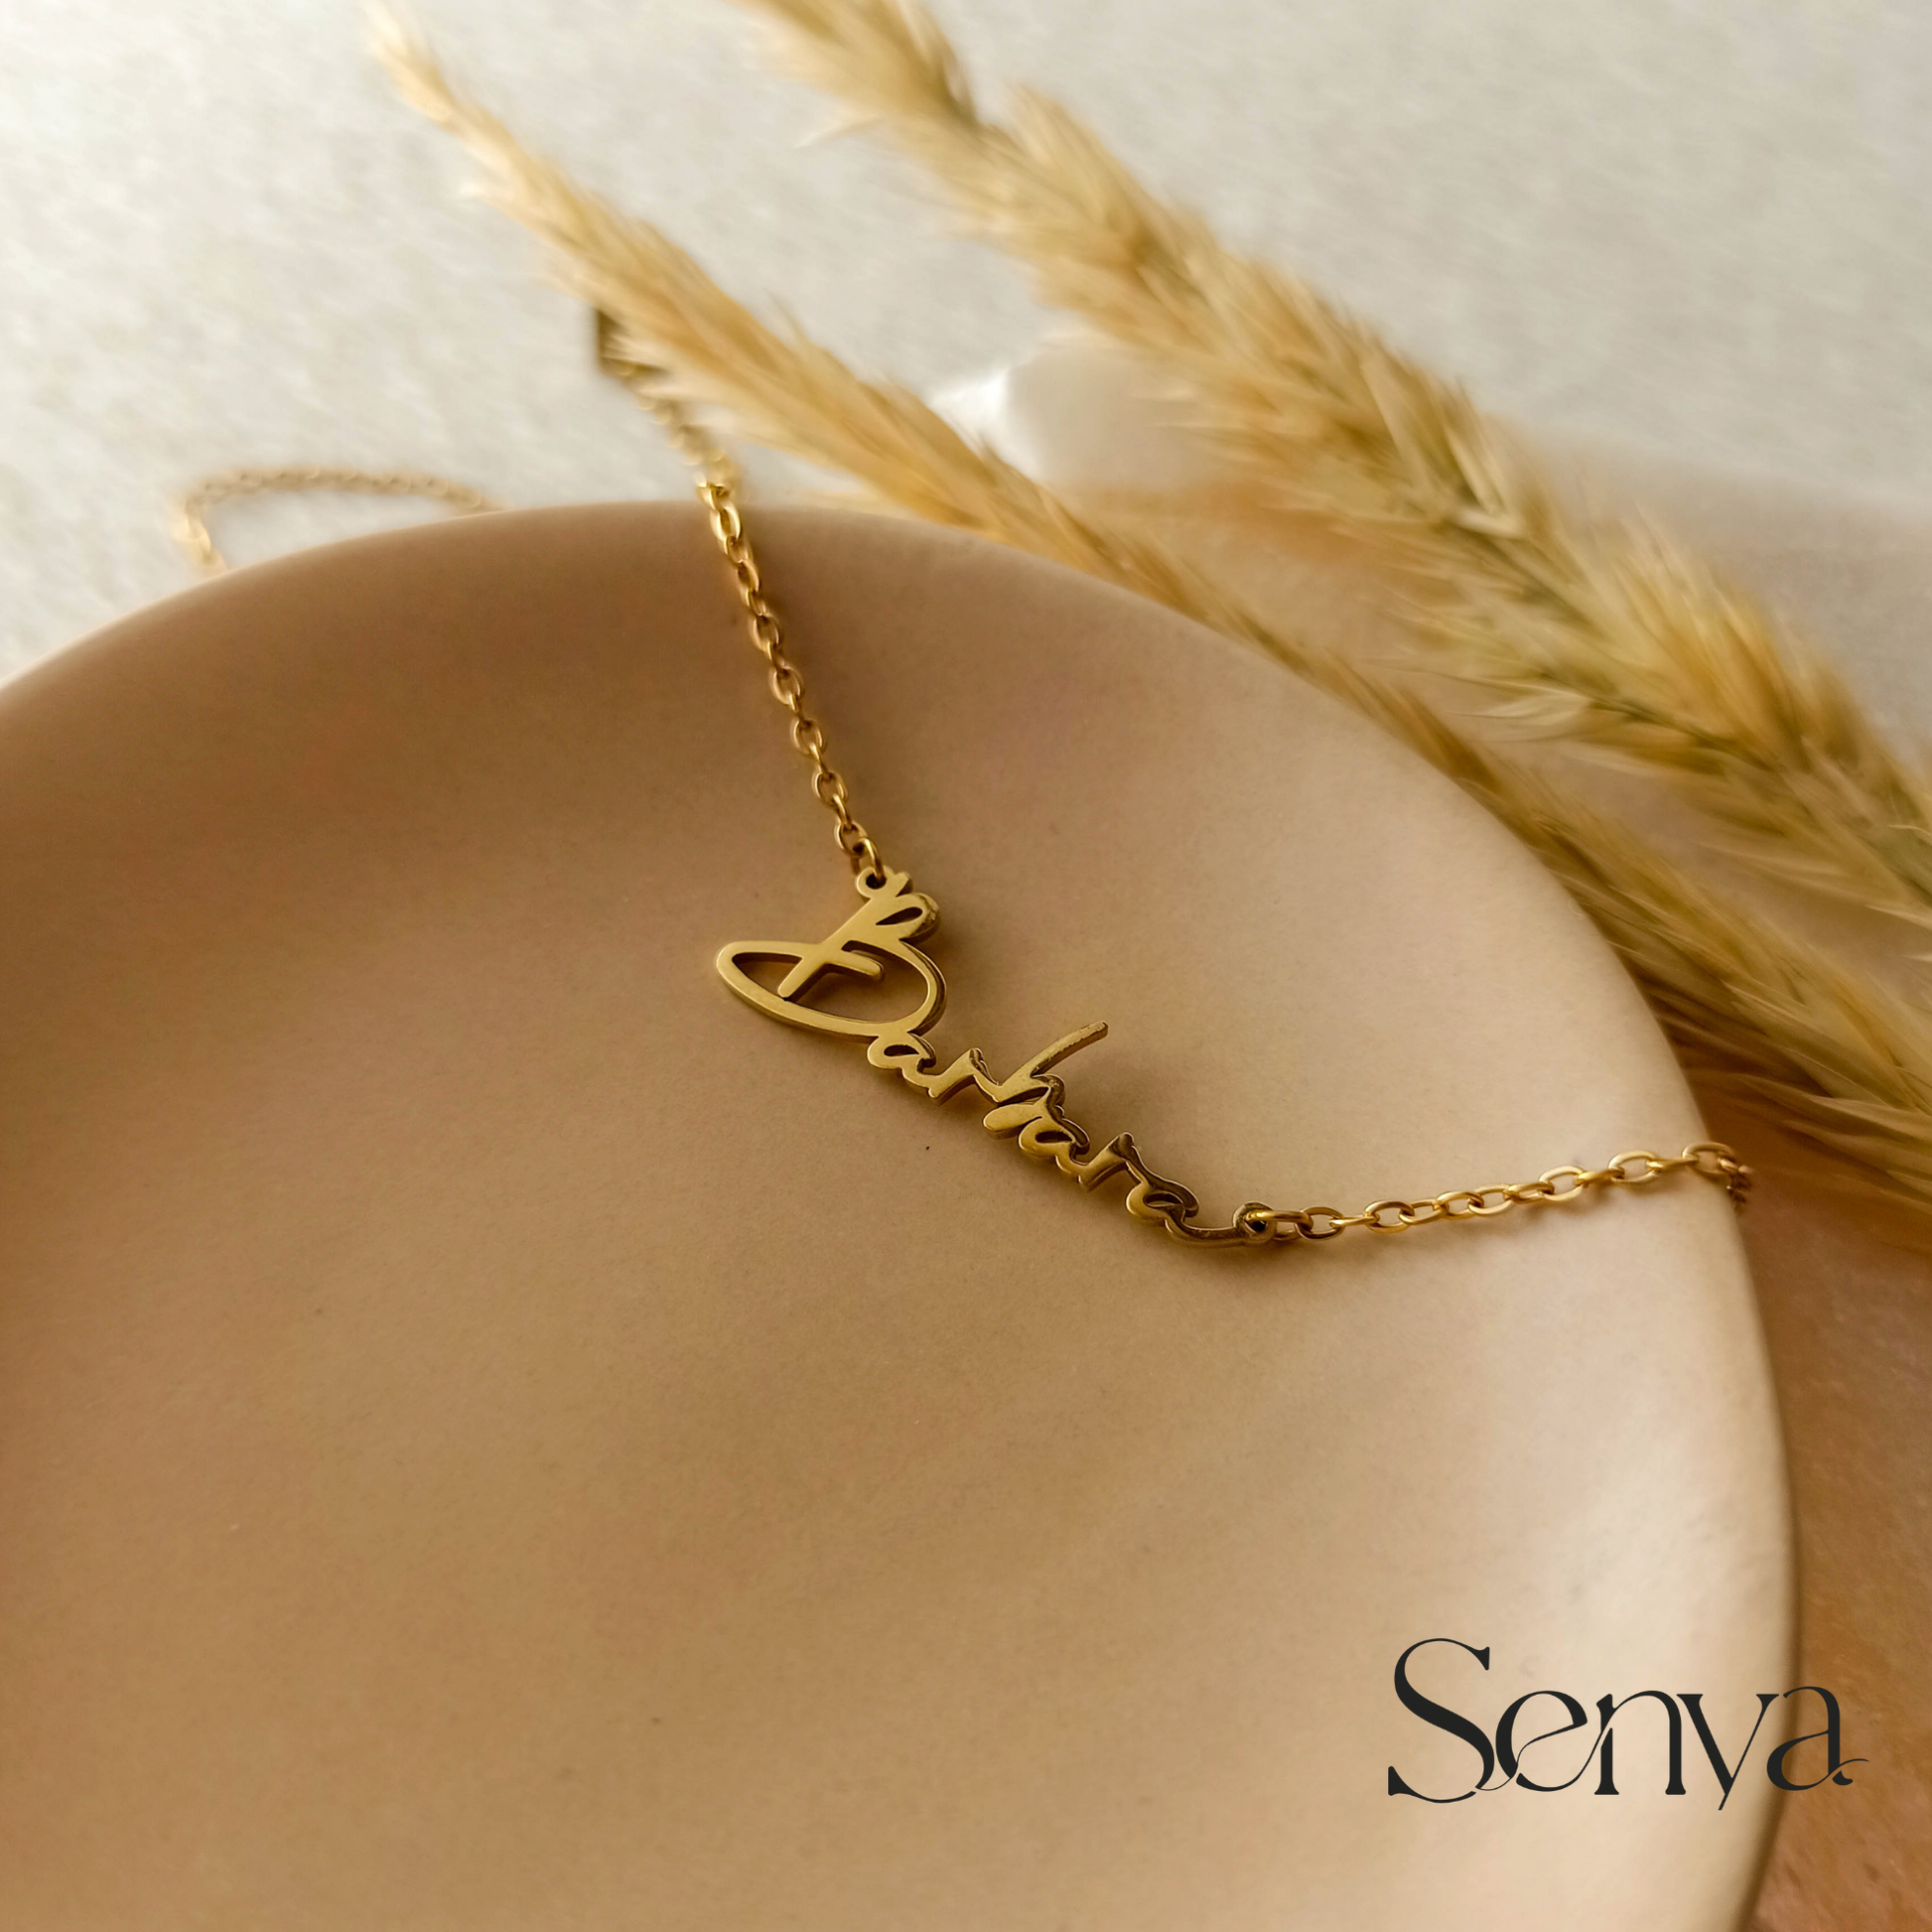 Where to buy a Custom Name Necklace, Unique Custom Name Necklace Designs, Custom Name Necklace , How to clean a Custom Name Necklace, Personalized Name Necklace, Dainty Custom Name Necklace, Women's Name Necklaces, Couples Name Necklaces, 14k Gold Custom Name Necklace , Bold Custom Name Necklace , Minimalist Custom Name Necklace ,